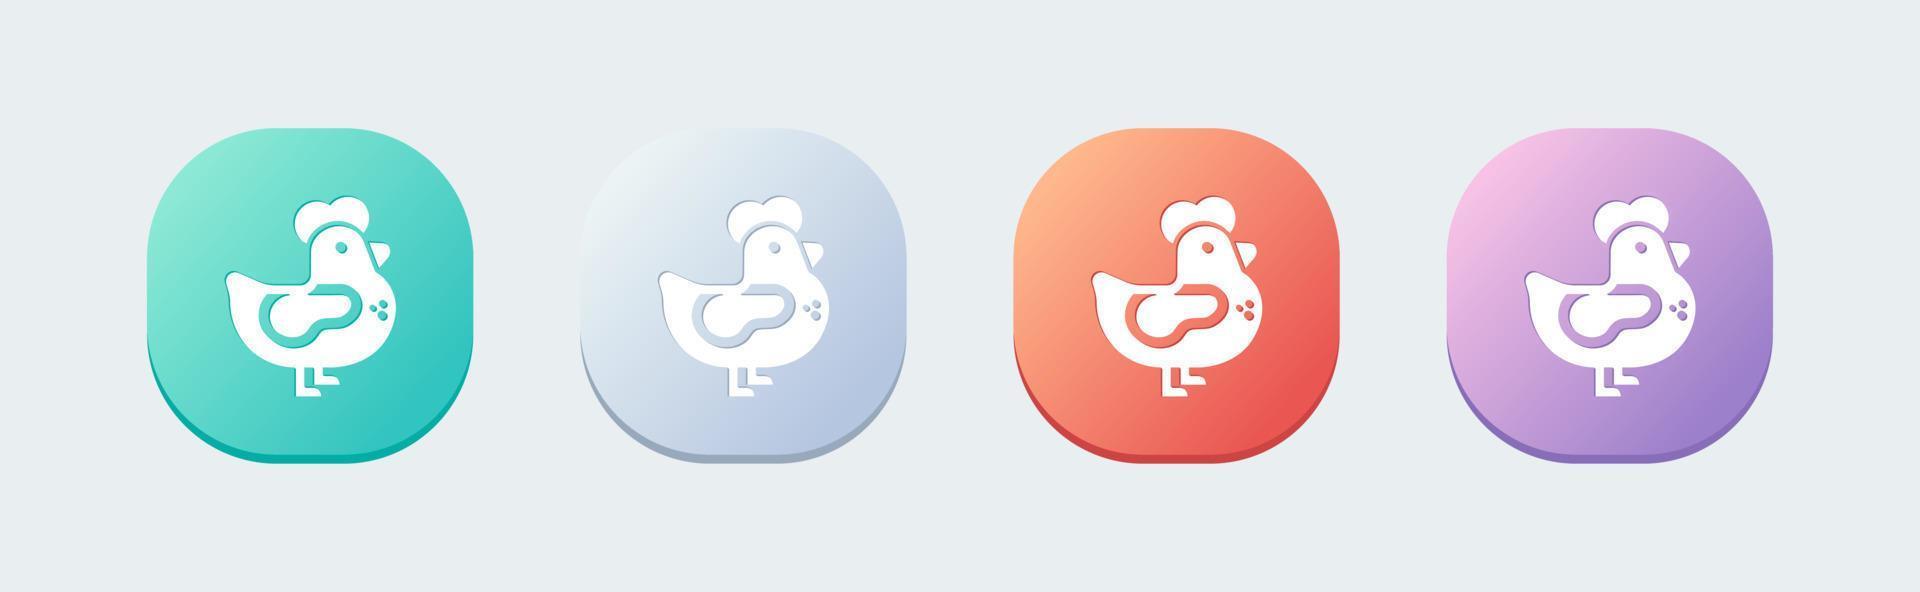 Chicken solid icon in flat design style. Hen signs vector illustrtaion.